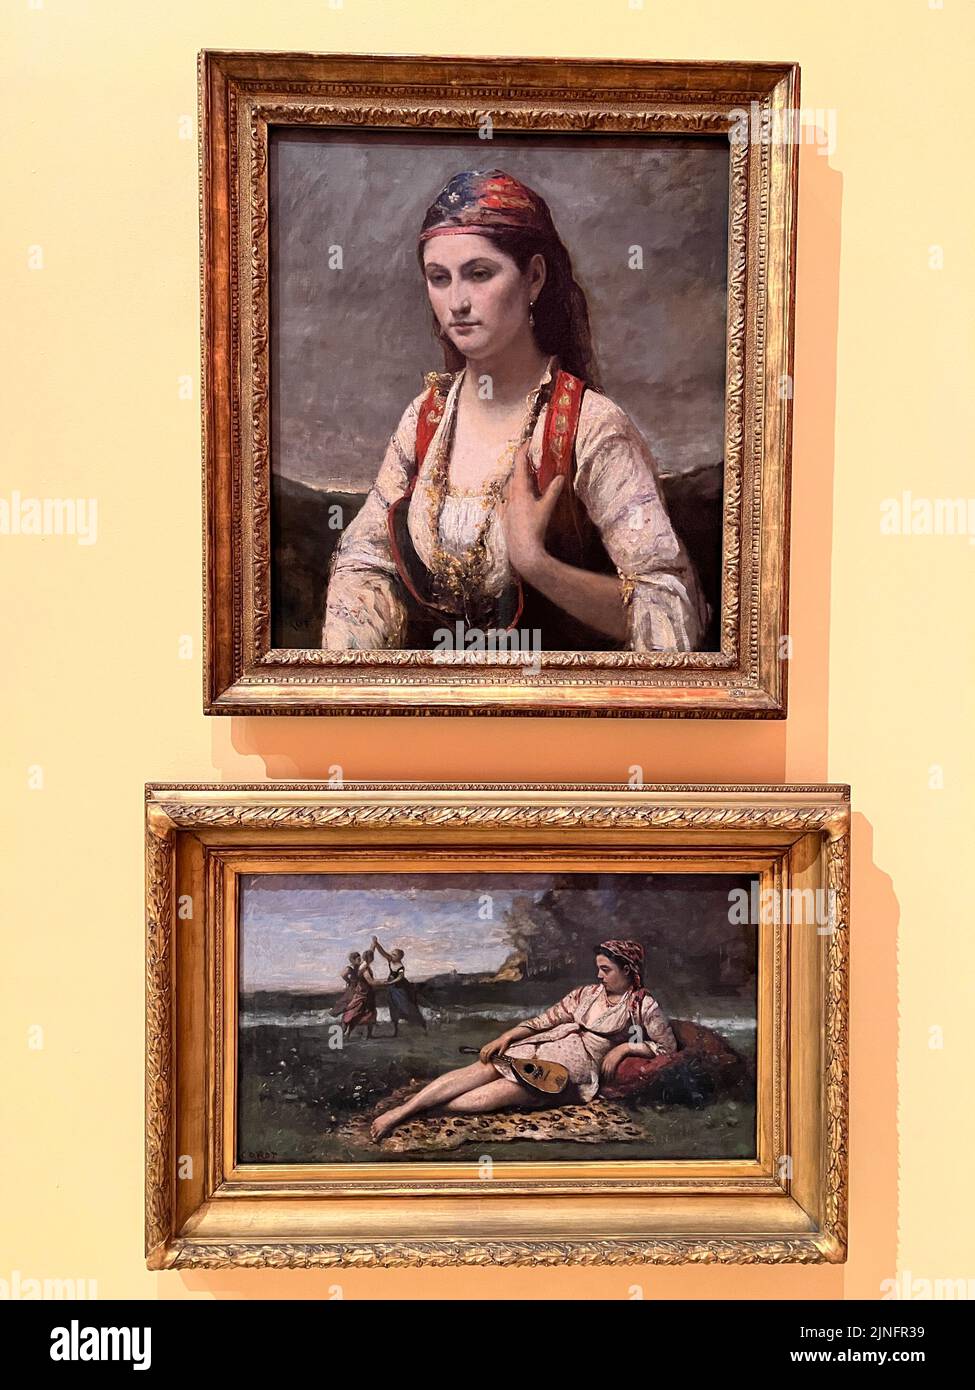 Paintings by Jean-Baptiste-Camille Corot, French, 1796-1875. The Young Woman of Albeno, 1872 (top), Young Woman of Sparta, 1868-70 (bottom). Brookklyn Museum Stock Photo